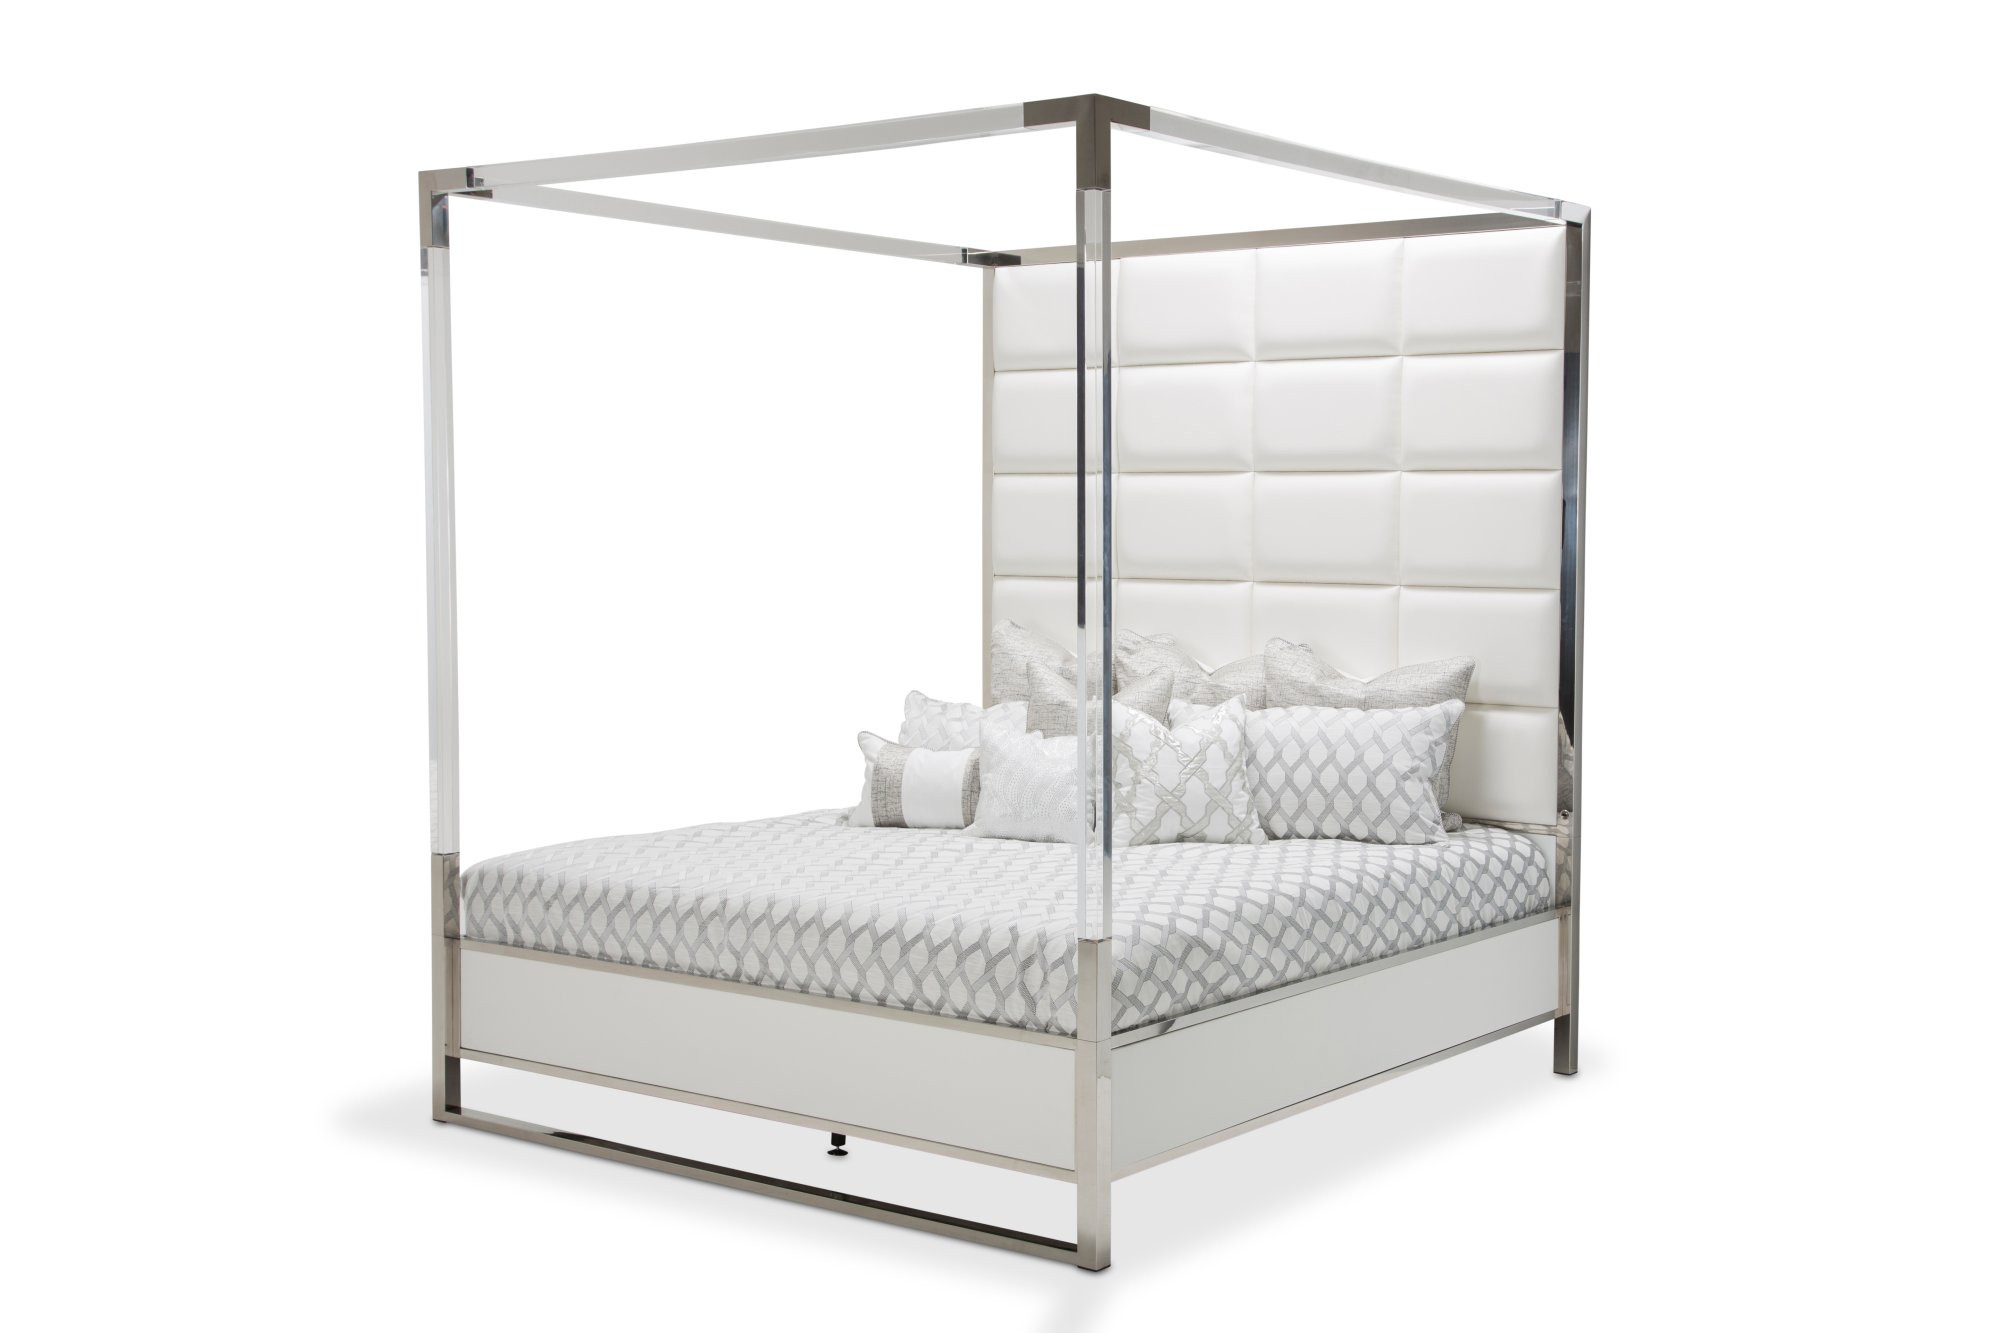 Cal King Metal Canopy Bed State, Canopy For California King Bed